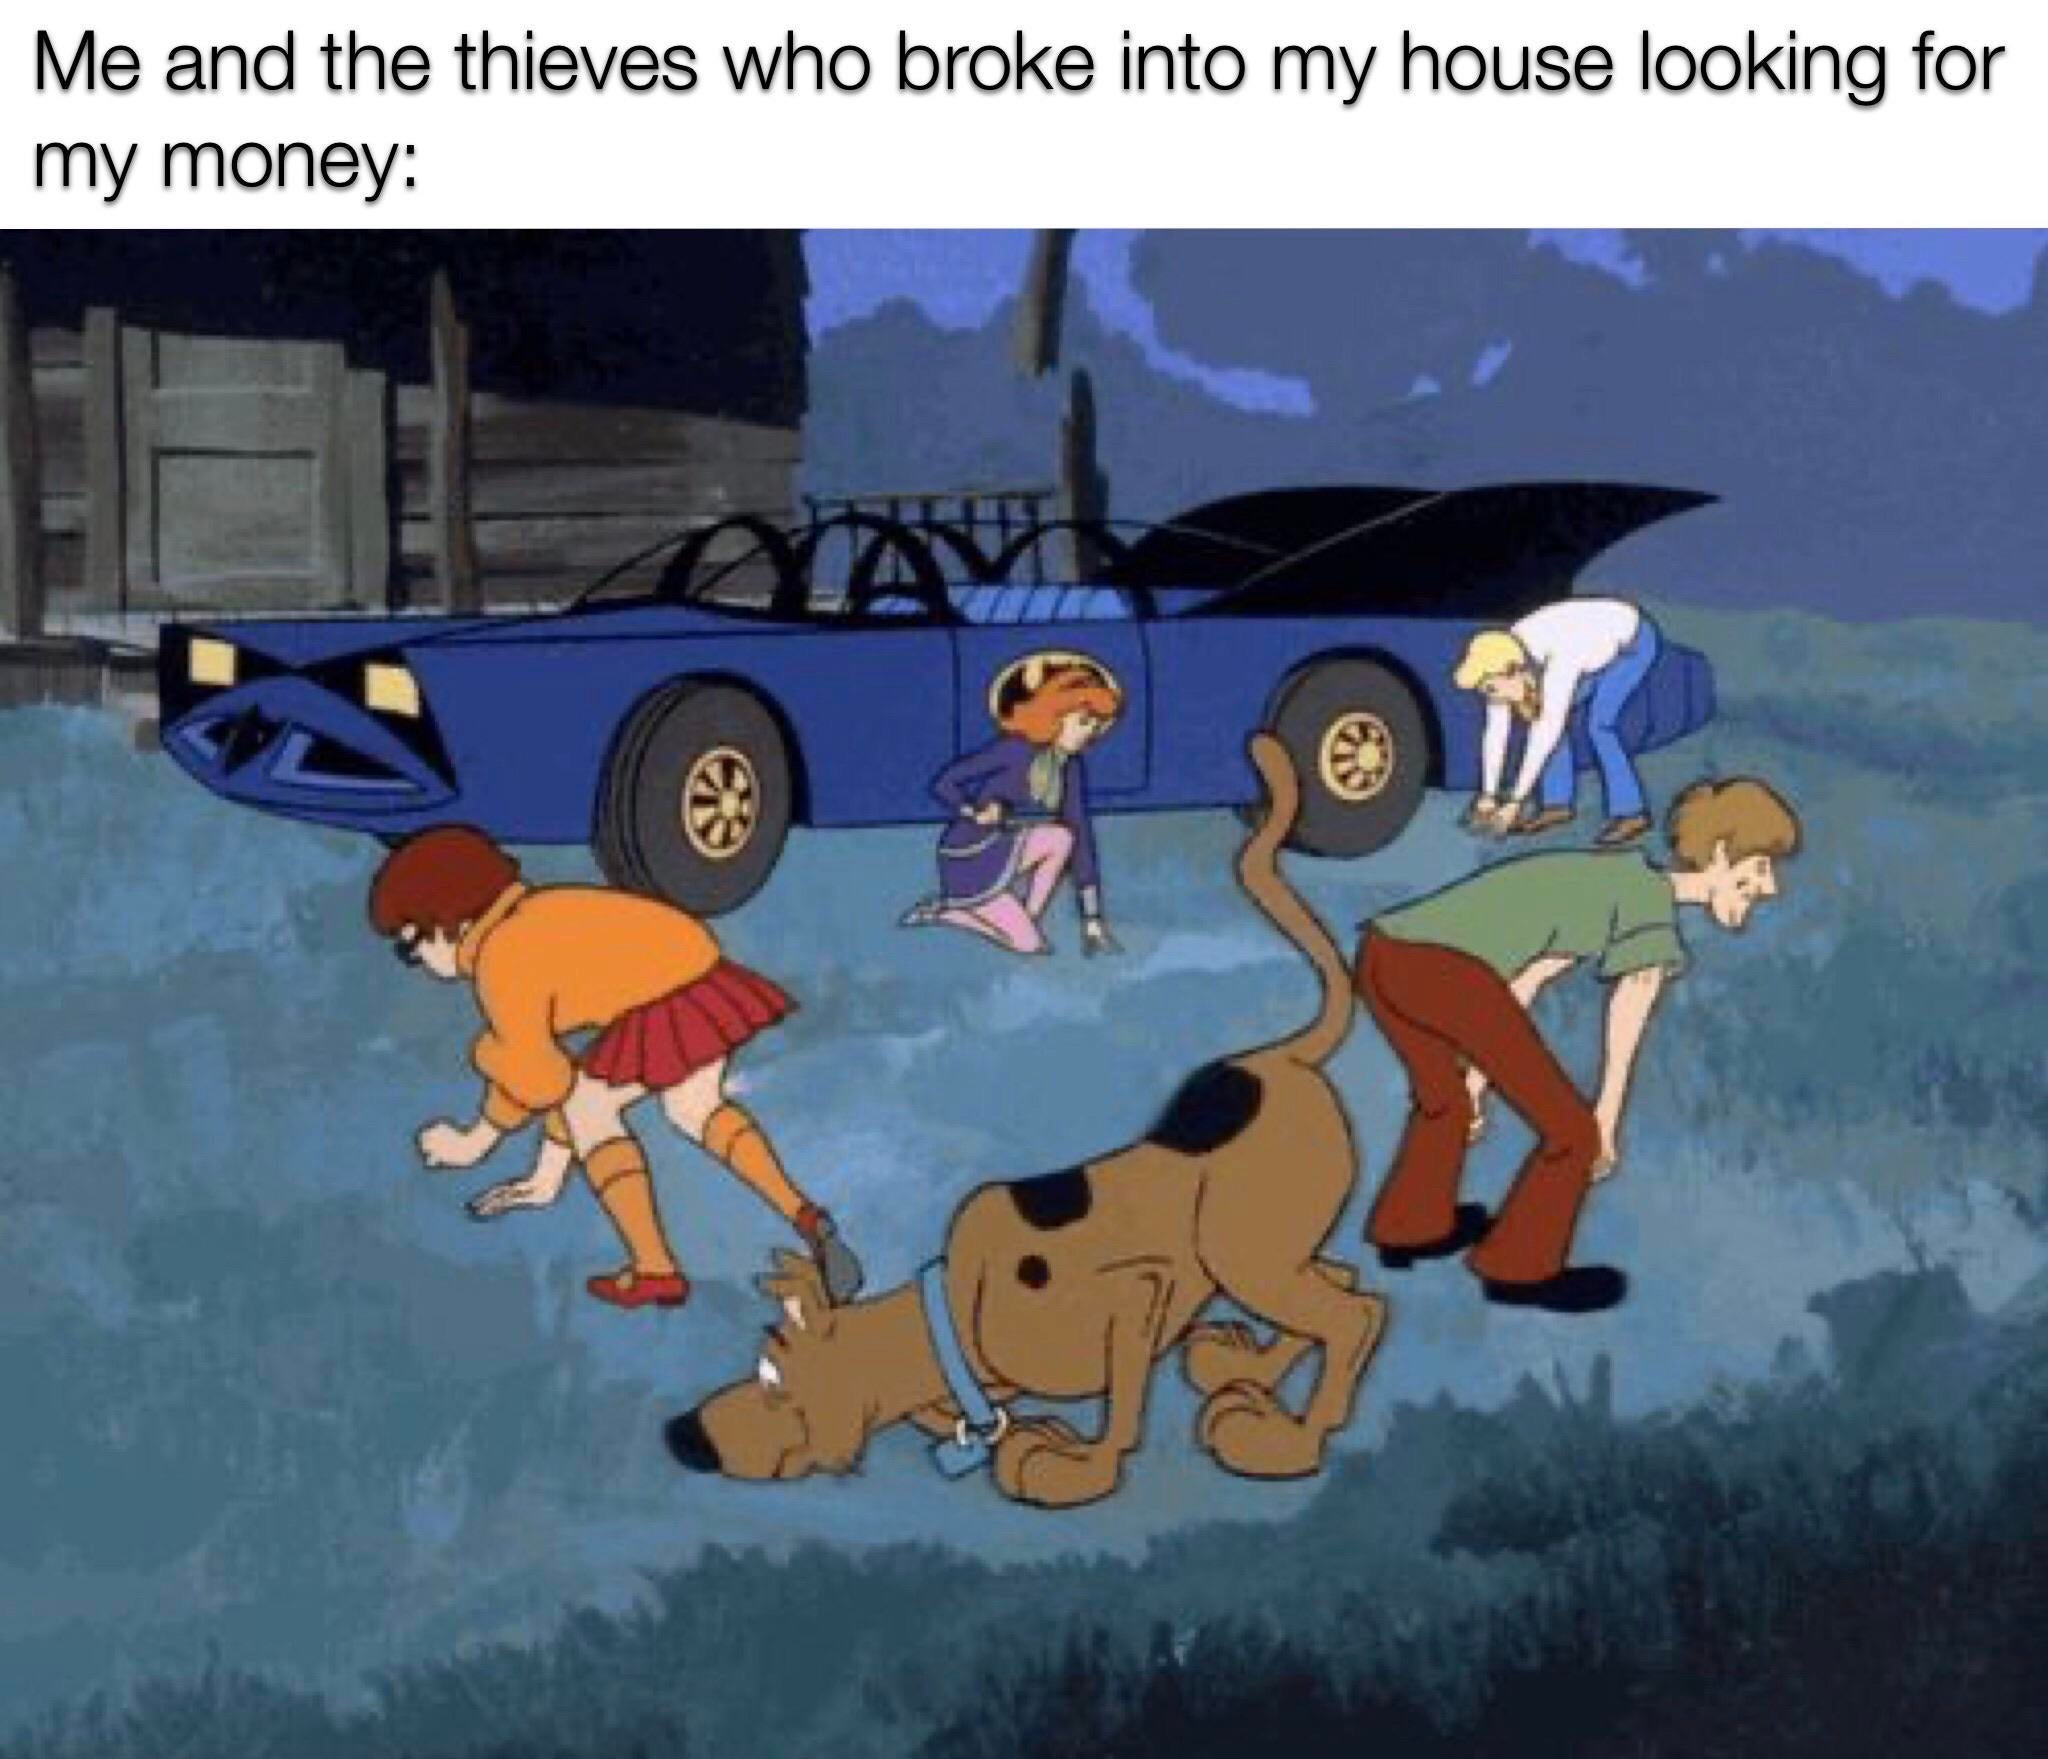 funny memes - meme scooby doo - Me and the thieves who broke into my house looking for my money